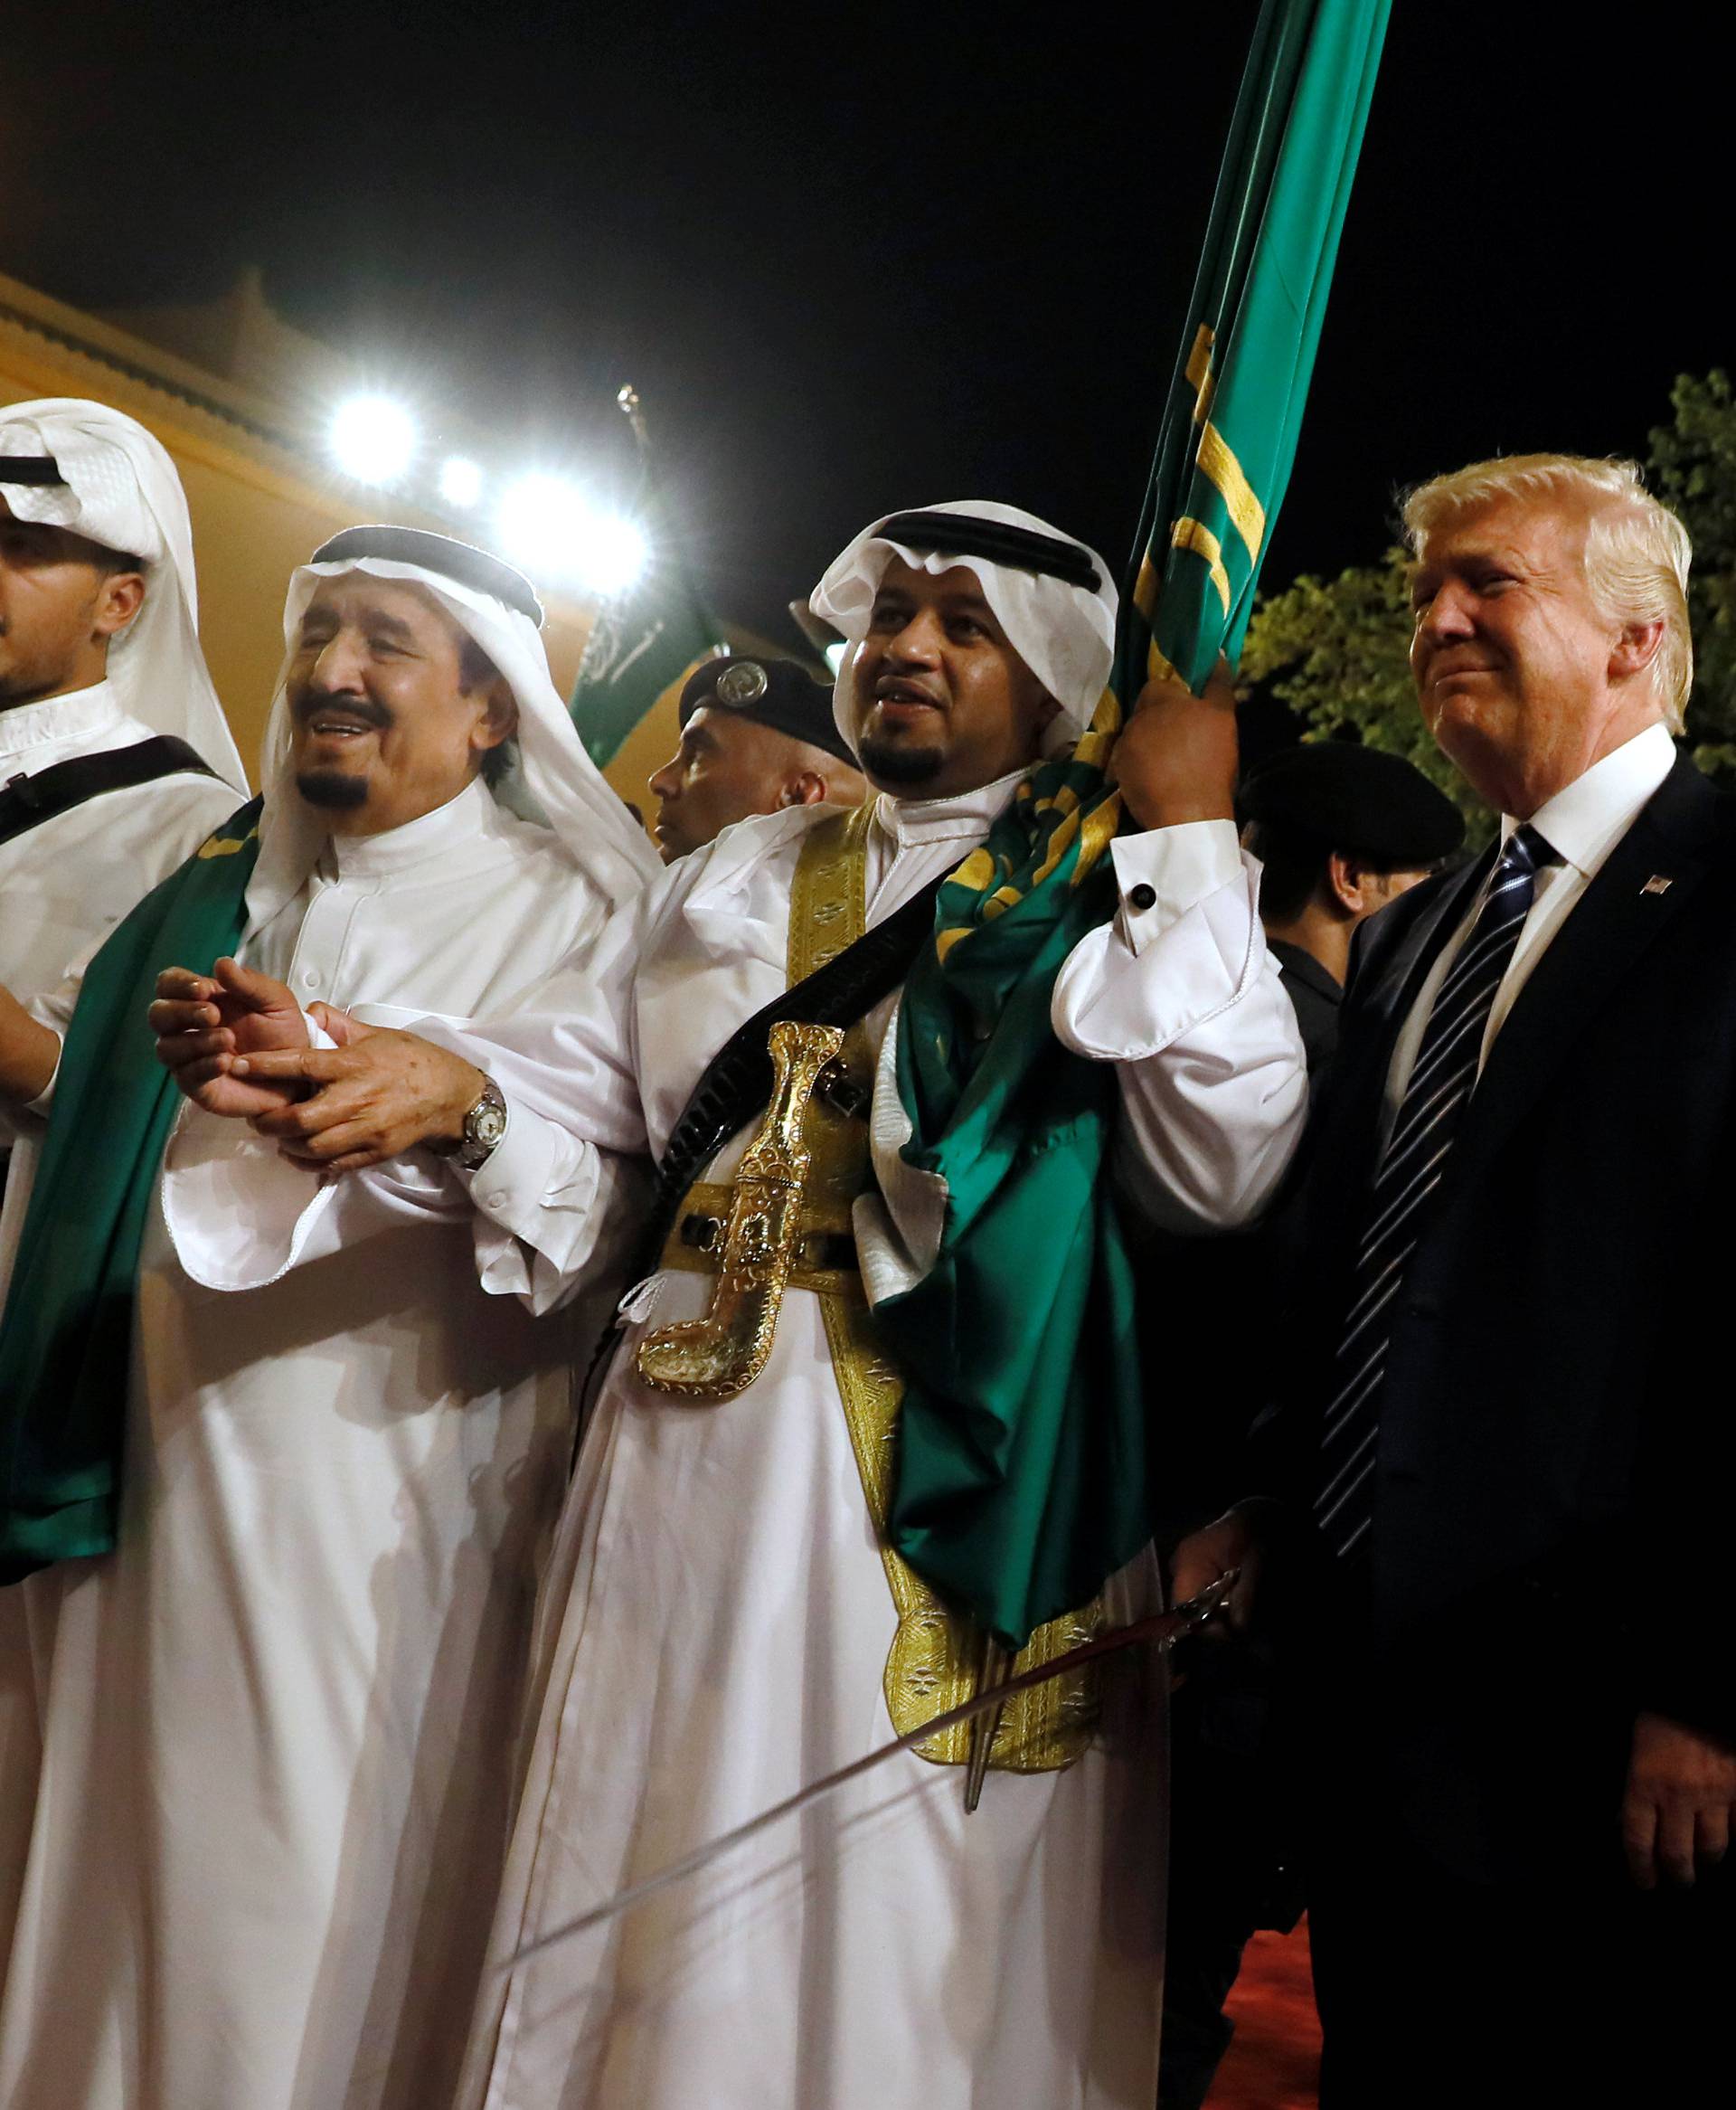 Saudi Arabia's King Salman welcomes Trump to dance with a sword during a welcome ceremony at Al Murabba Palace in Riyadh